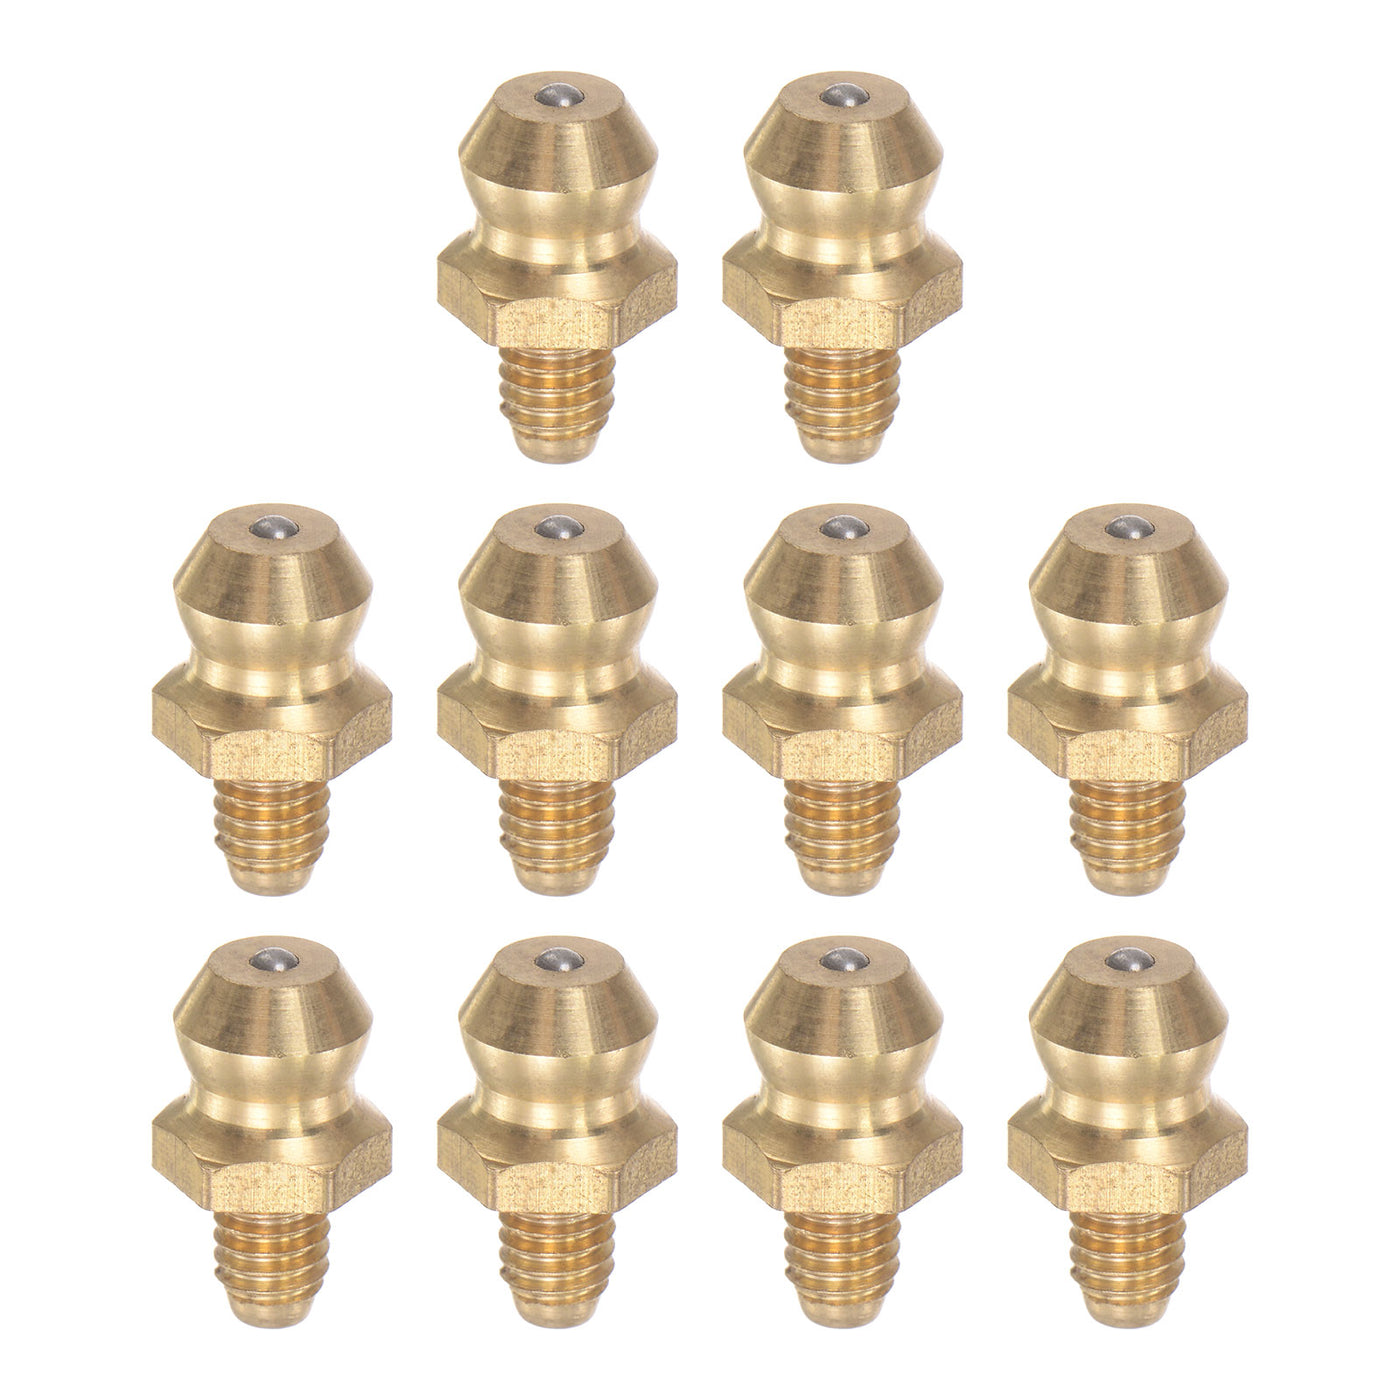 uxcell Uxcell Brass Straight Hydraulic Grease Fitting Accessories M4 x 0.7mm Thread, 10Pcs